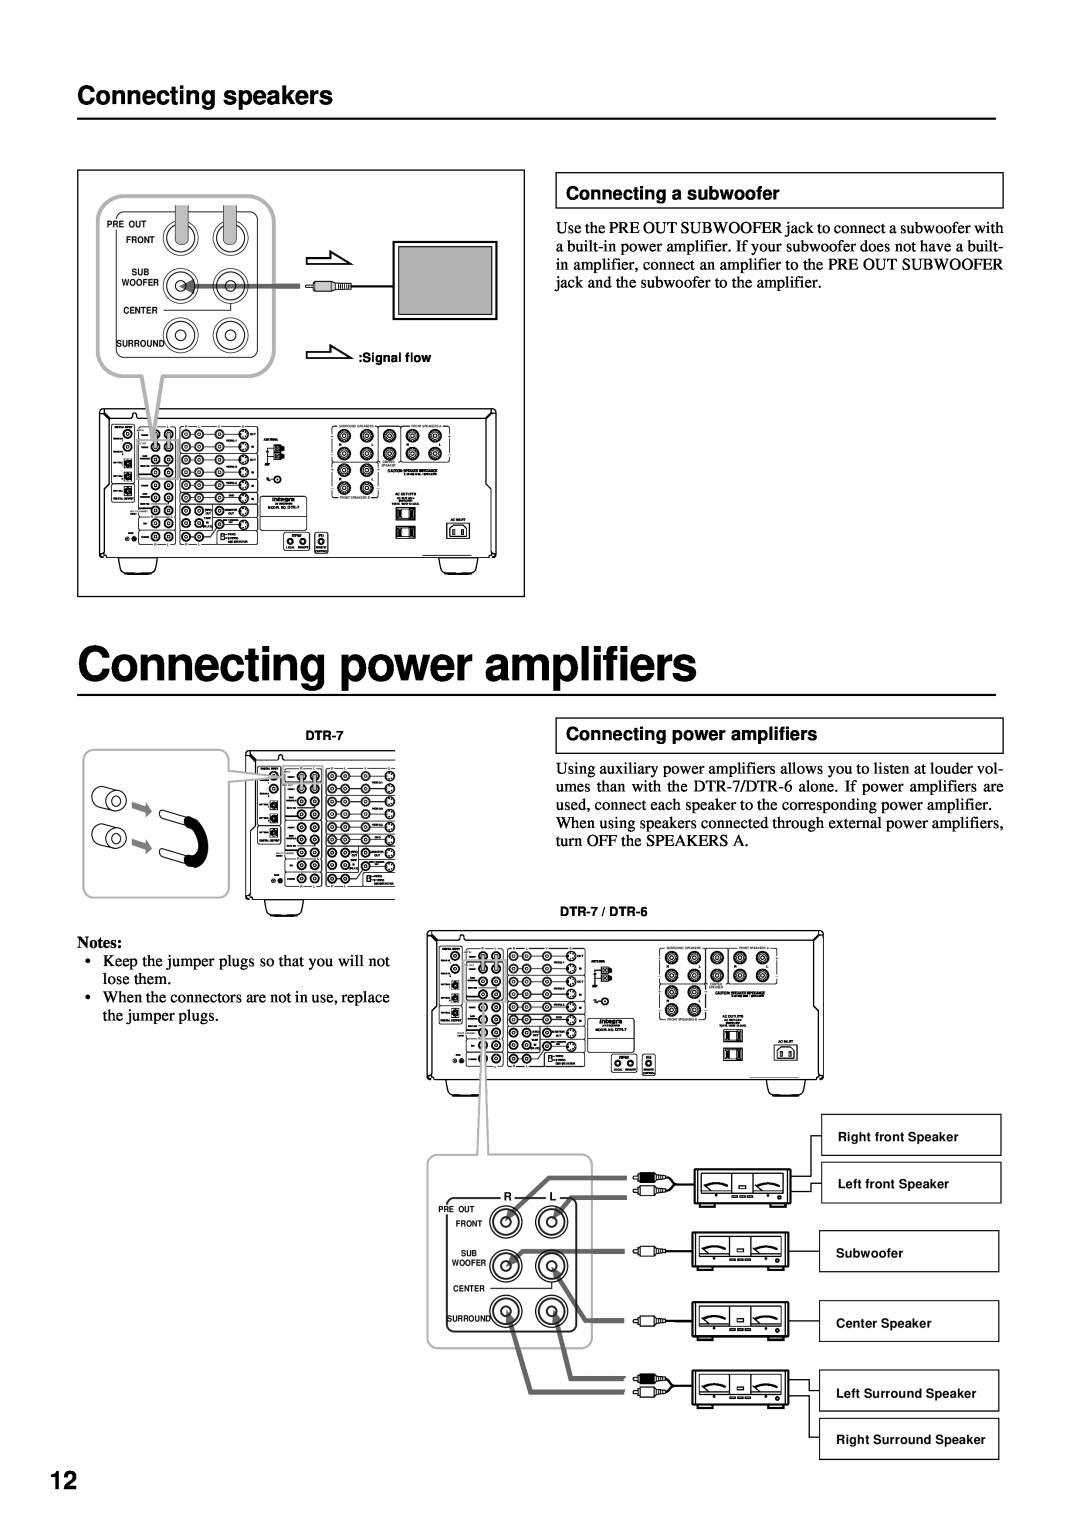 Integra DTR-7 instruction manual Connecting power amplifiers, Connecting speakers, Connecting a subwoofer 